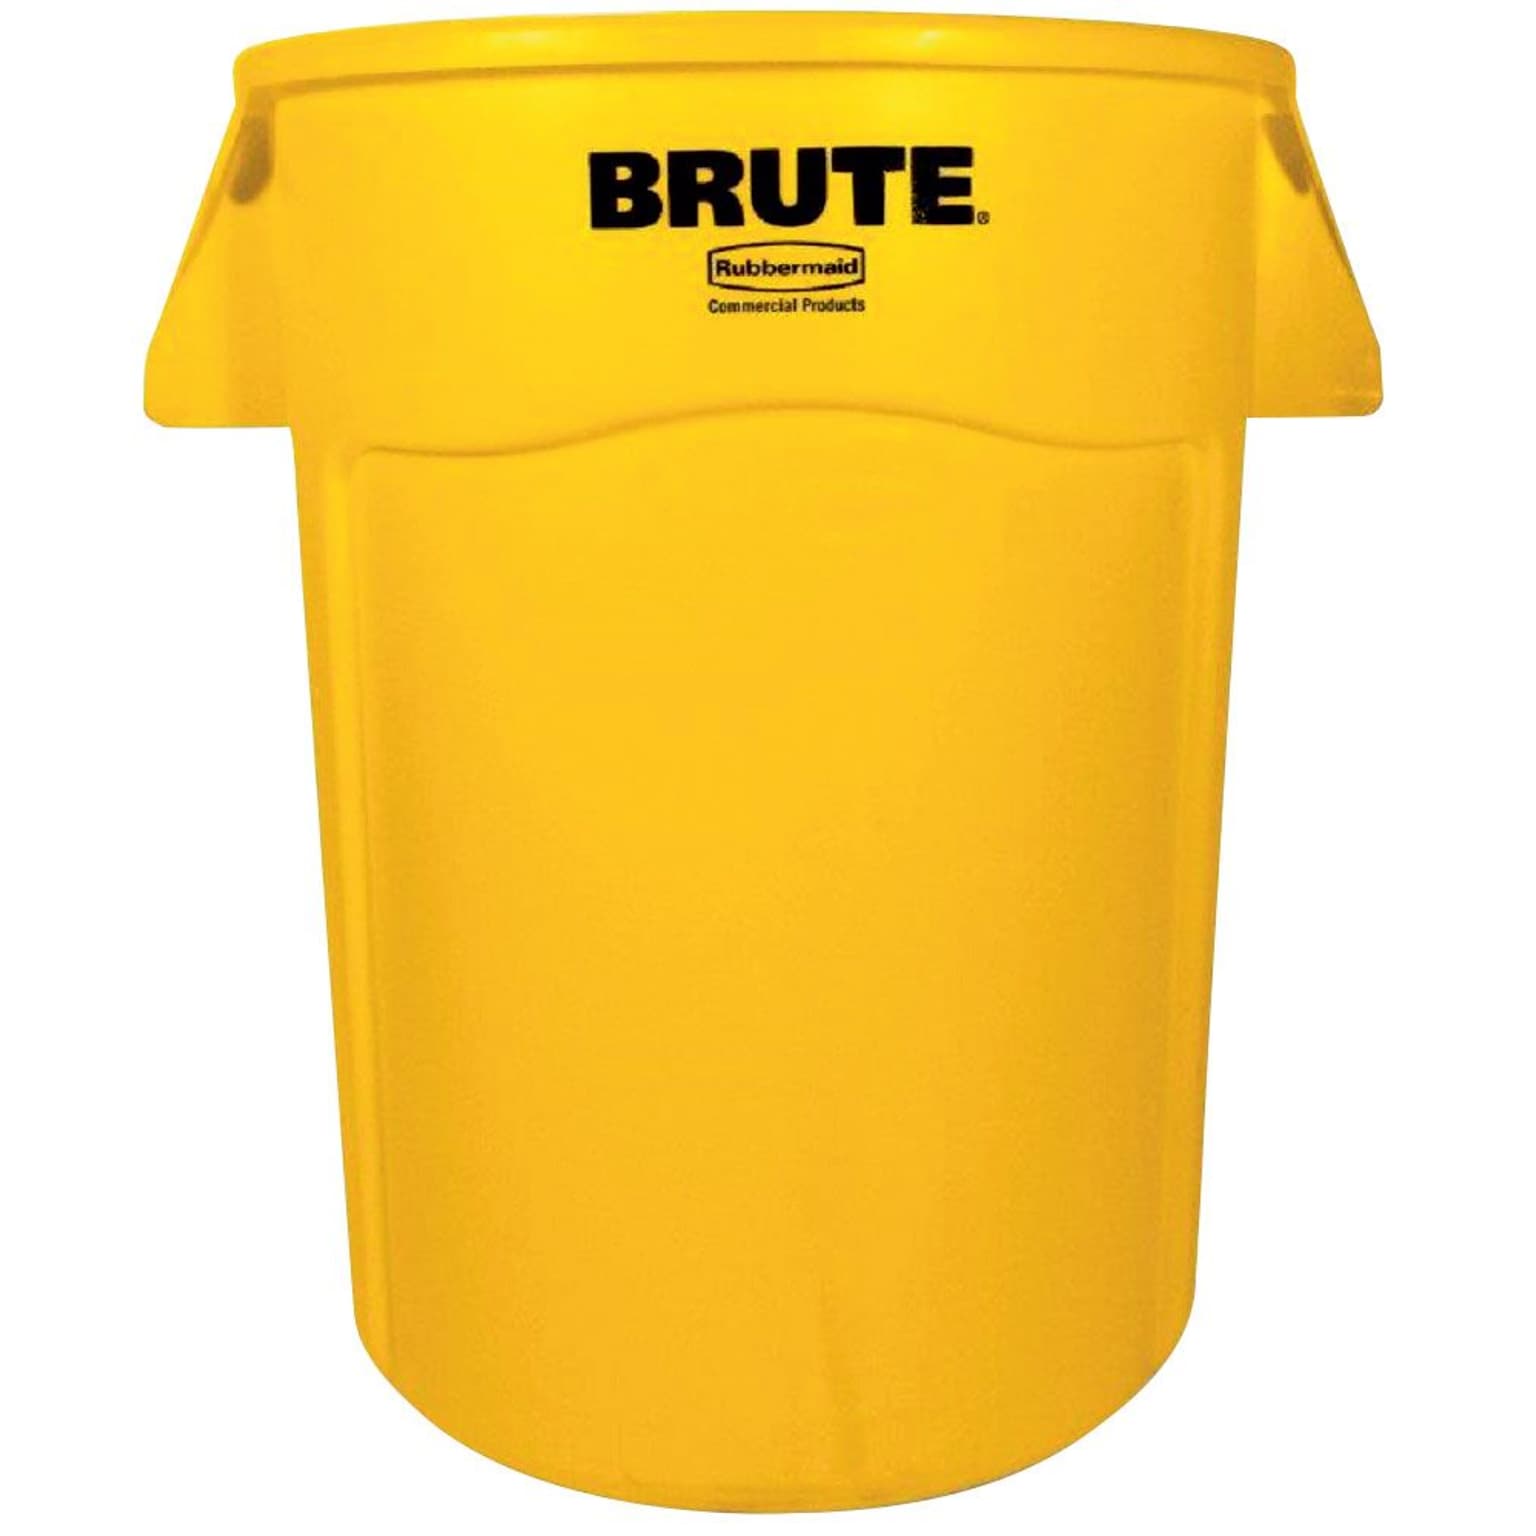 Rubbermaid Round Brute Trash Can Container w/Venting Channels, Yellow, 44 gallon